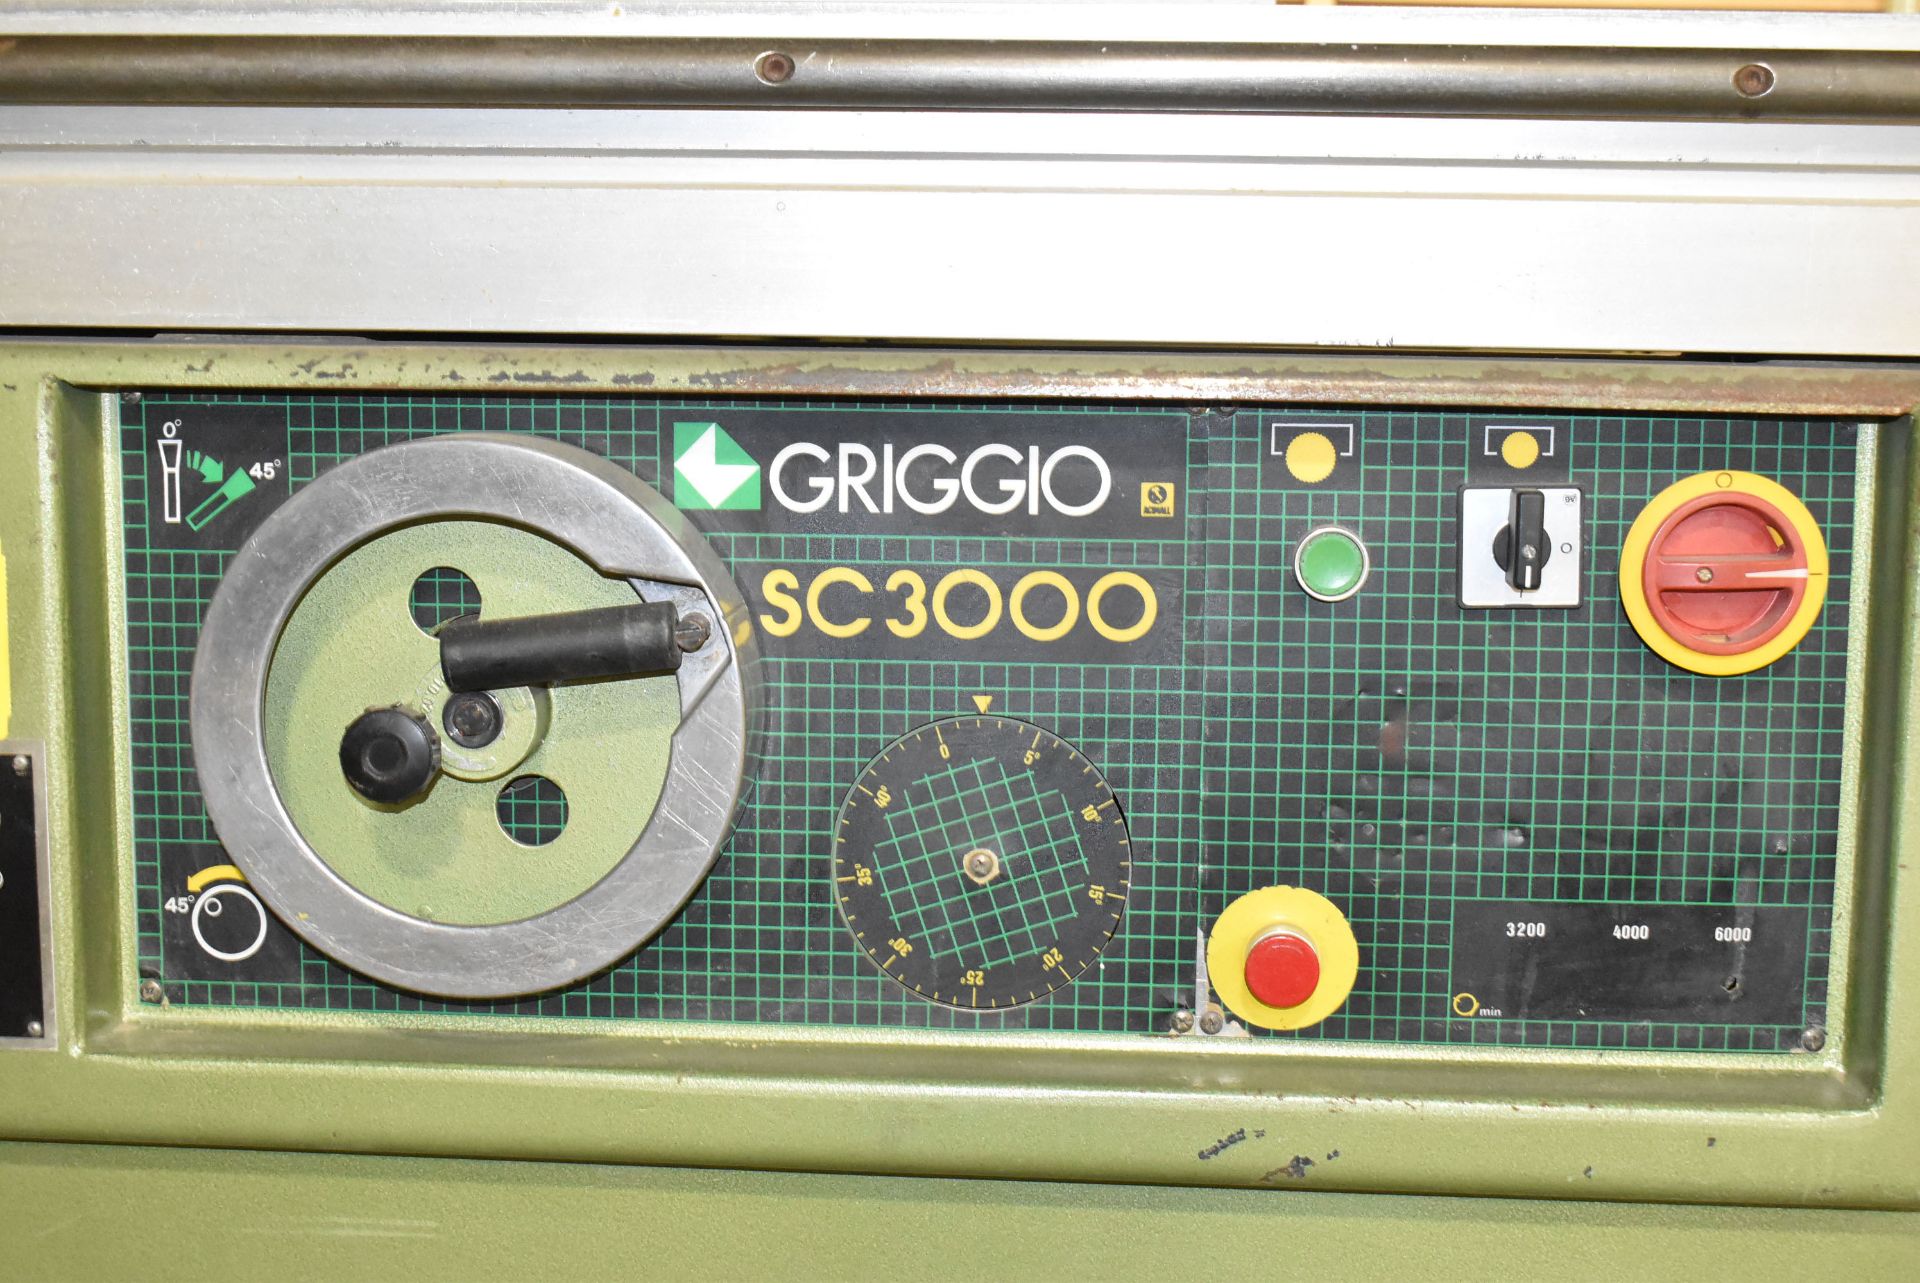 GRIGGIO SC 3000 SLIDING TABLE SAW WITH 7.5 HP MOTOR, 25" X 46" MAIN TABLE, 15" X 125" SLIDING TABLE, - Image 3 of 5